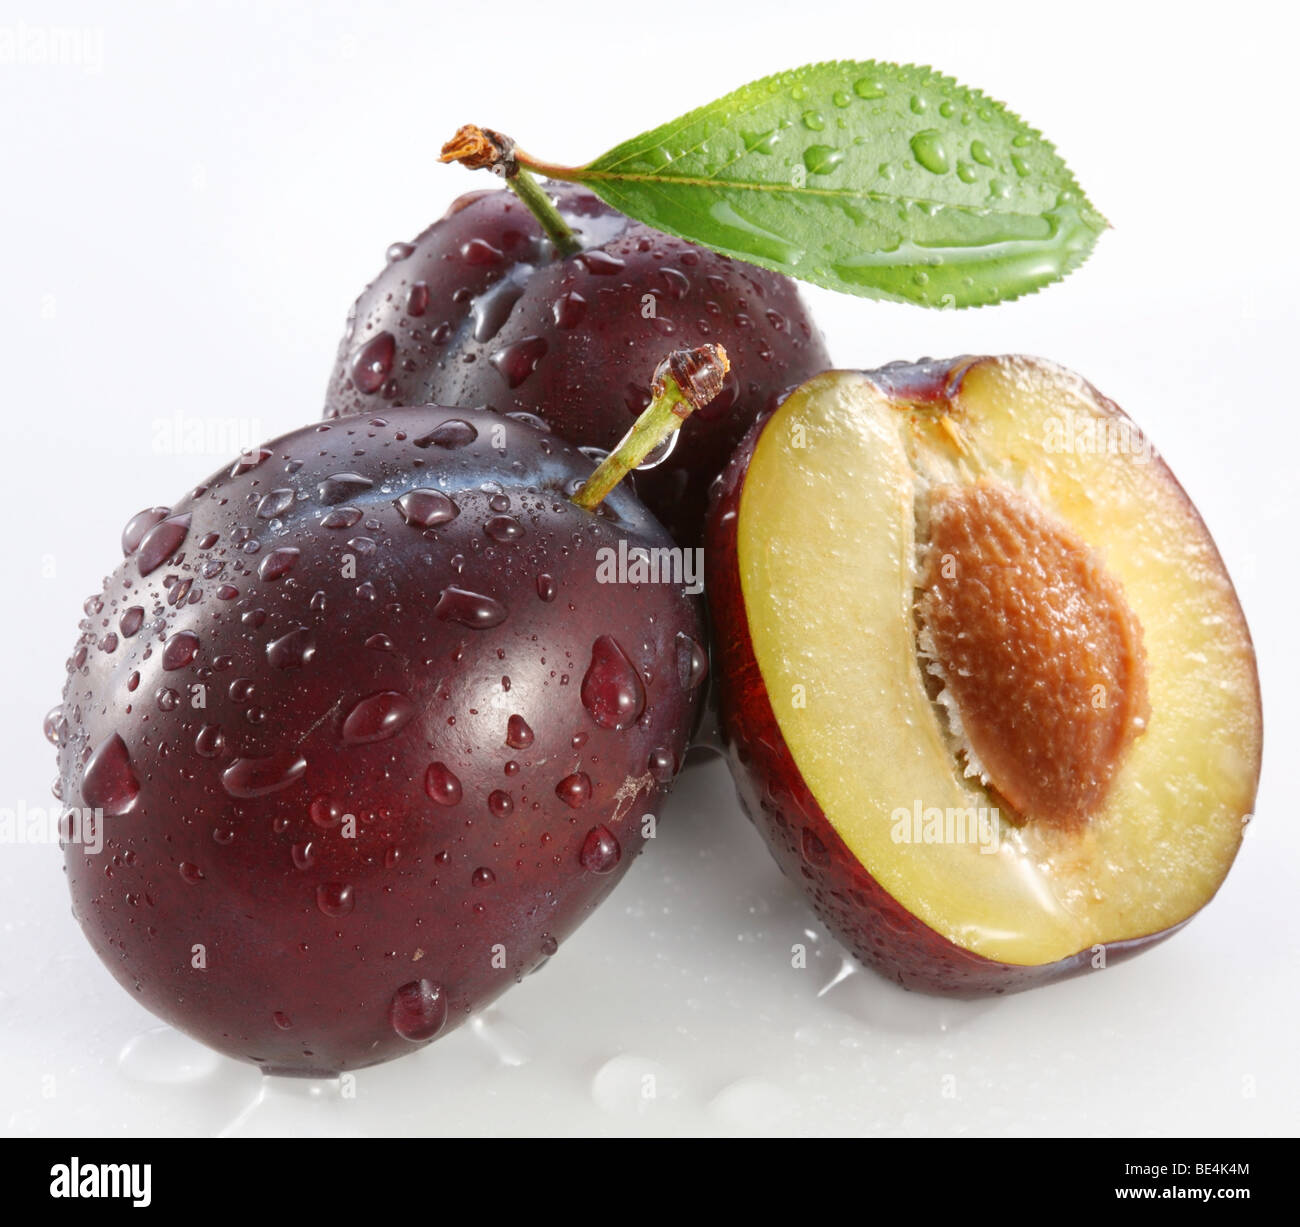 Plums on a white background Stock Photo